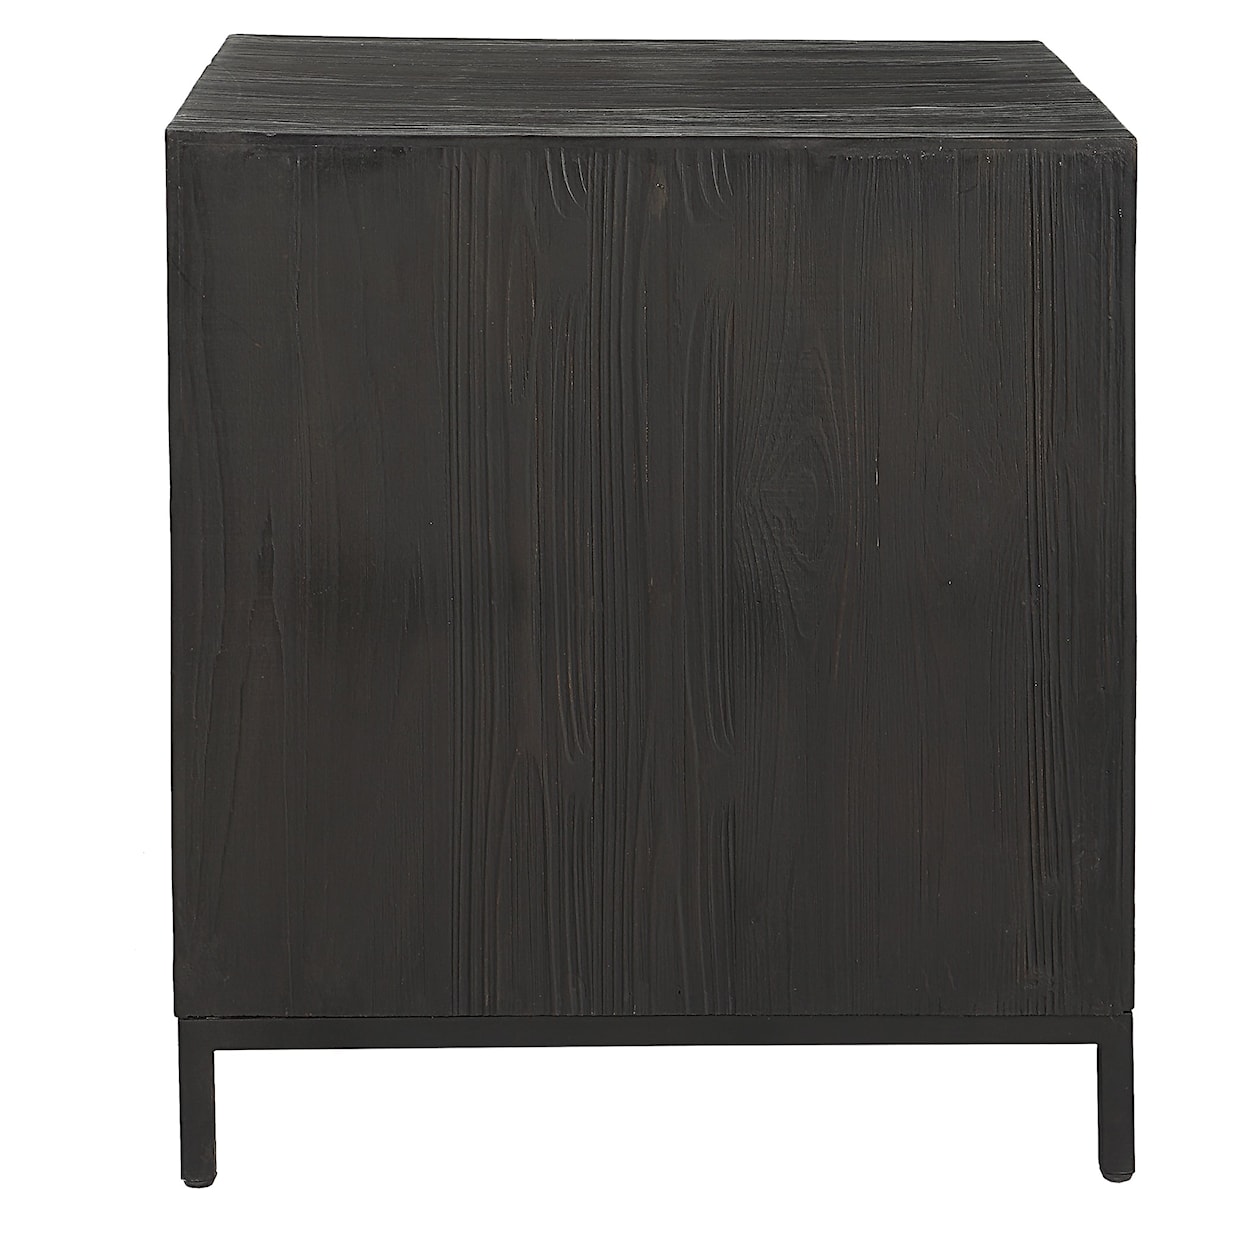 Uttermost Aiken Geometric End Table with Storage